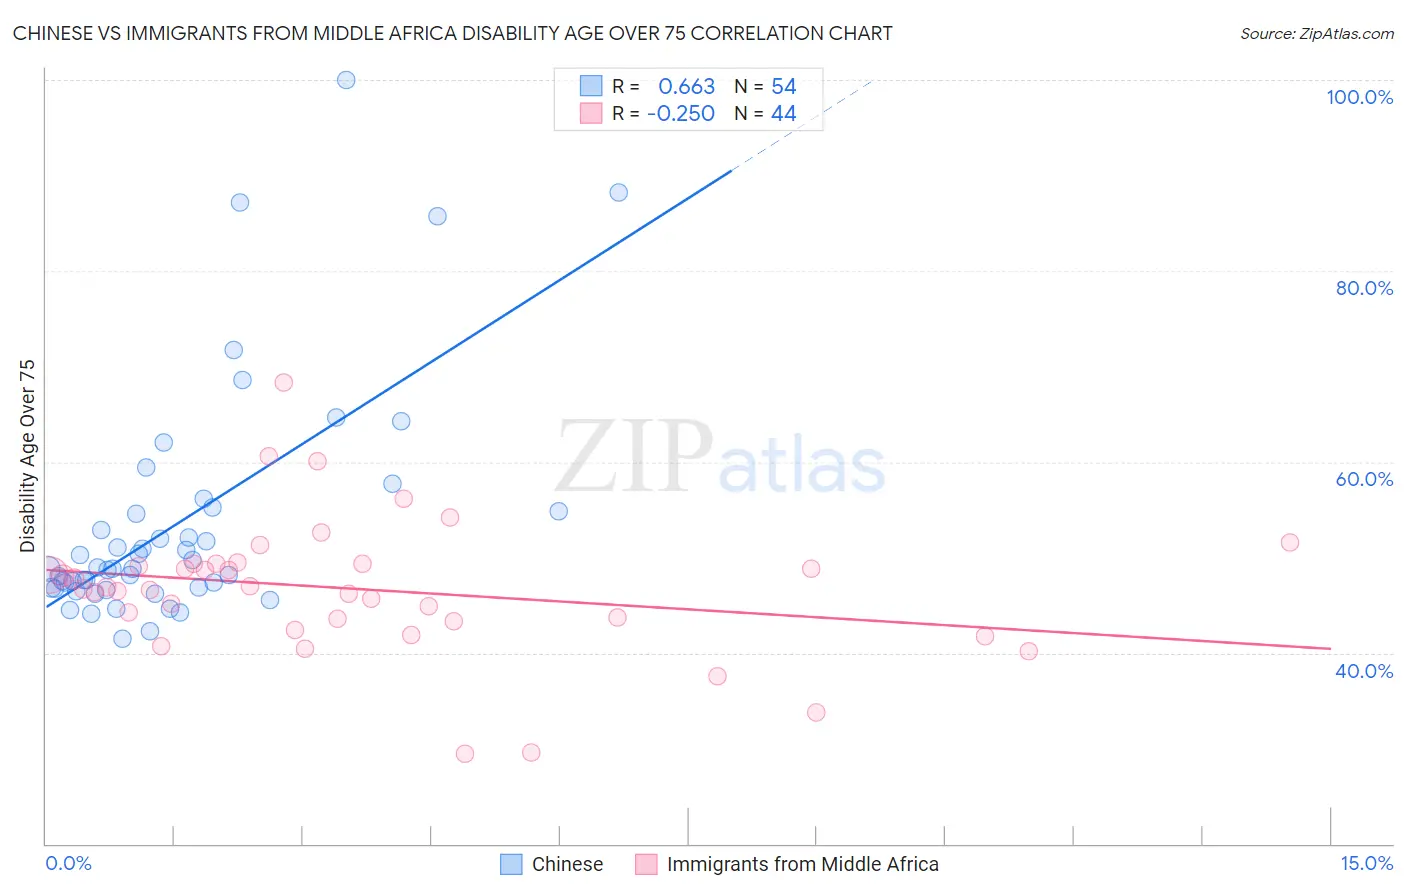 Chinese vs Immigrants from Middle Africa Disability Age Over 75